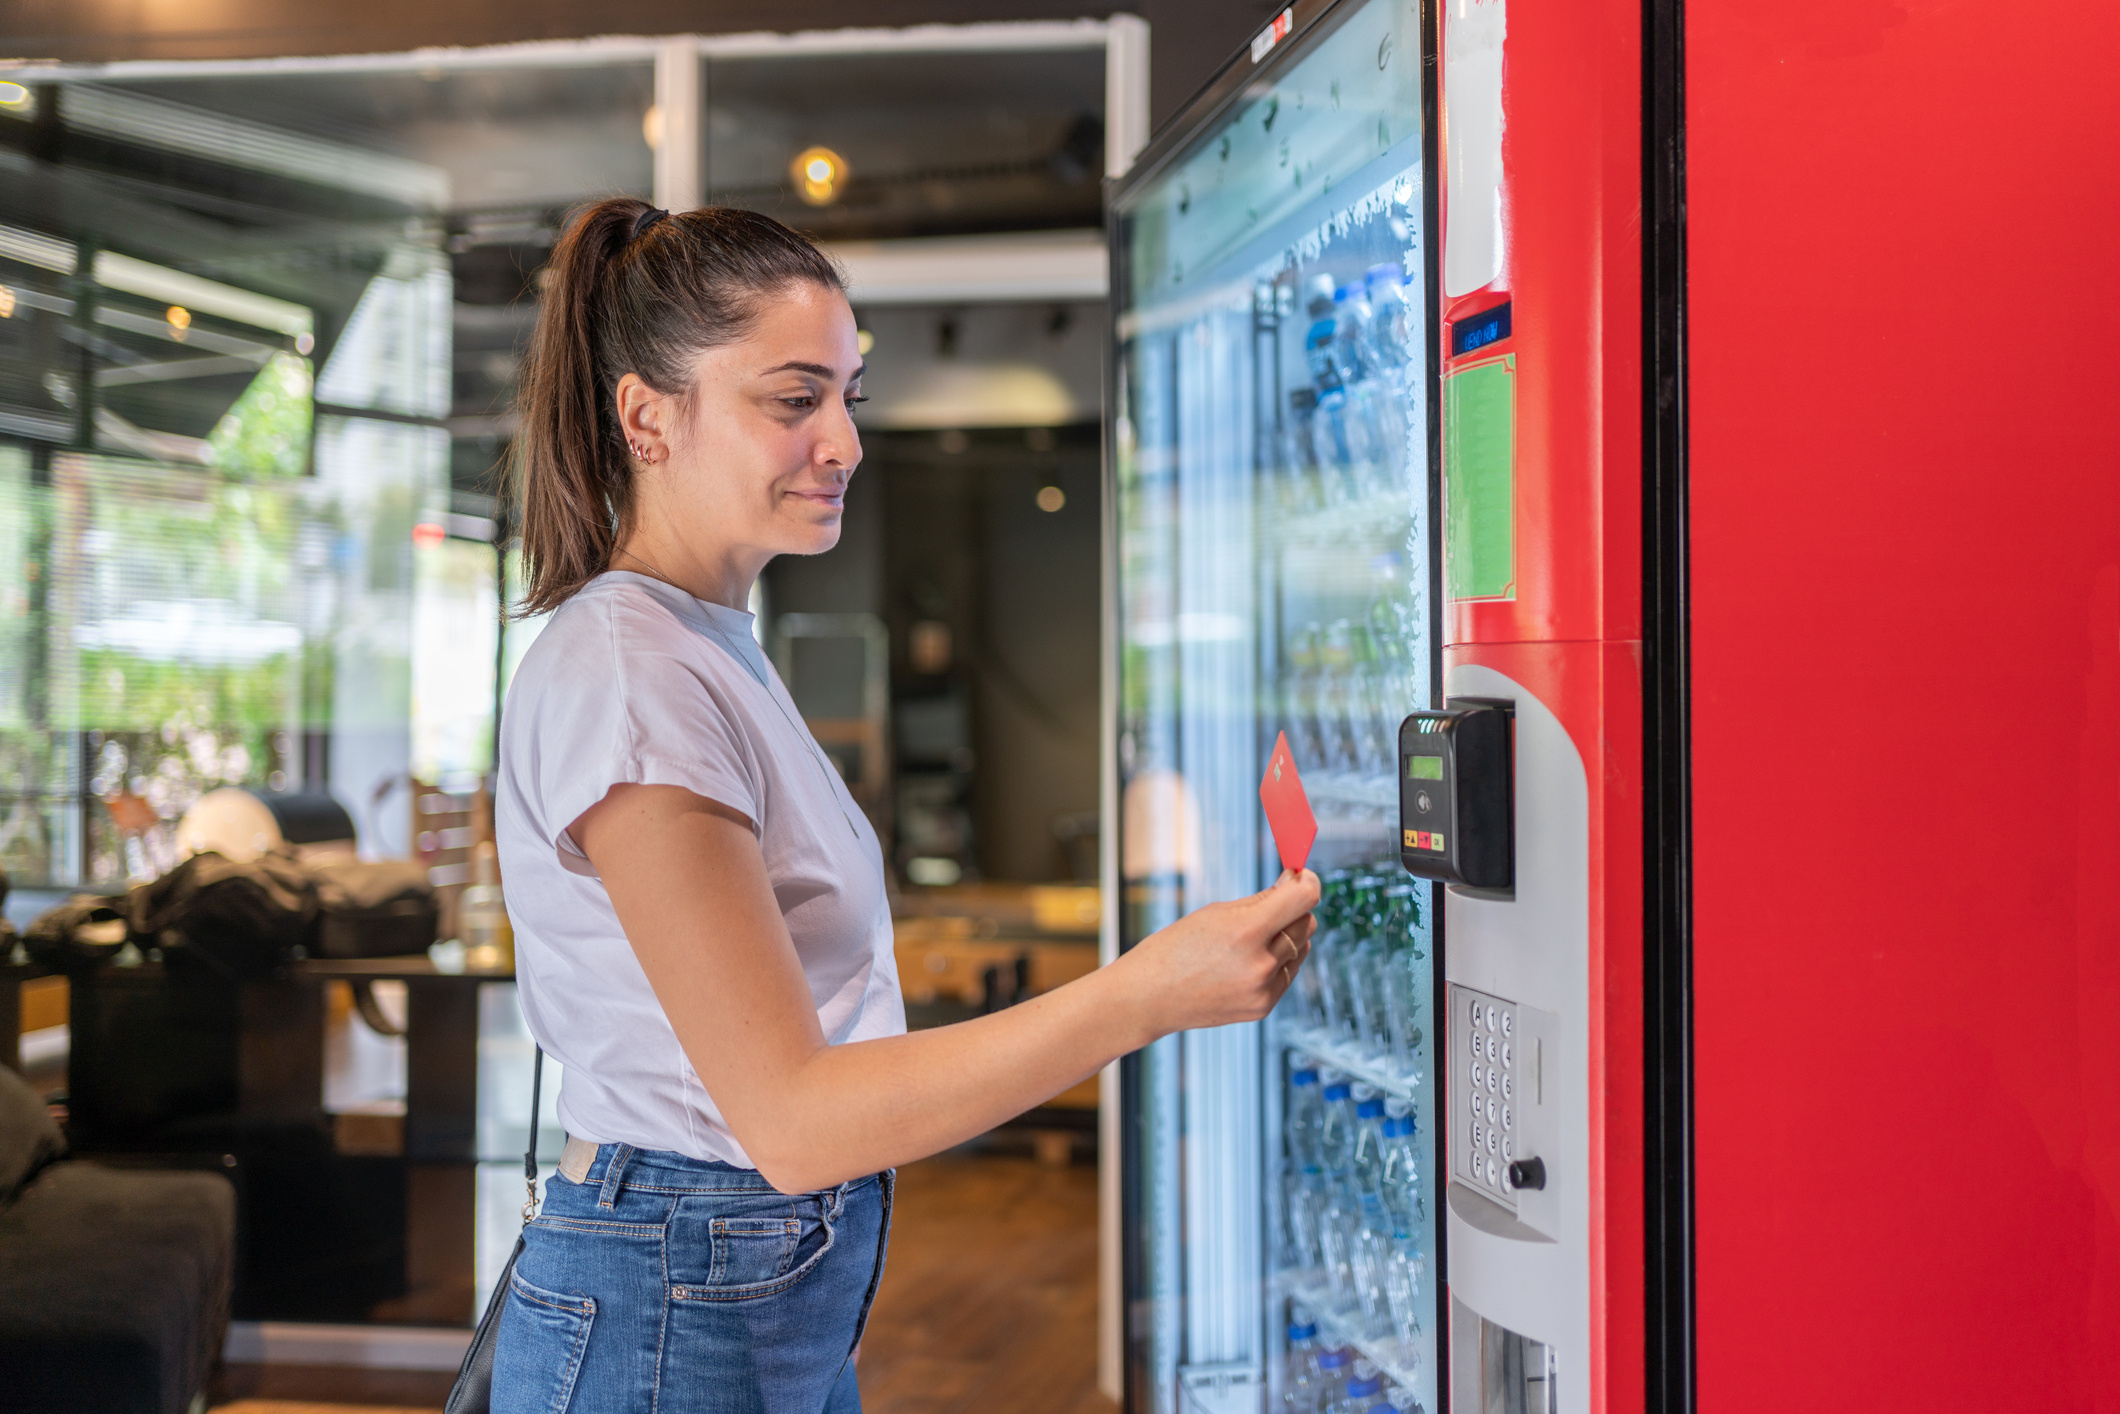 Vending Machine Business with Huge Potential